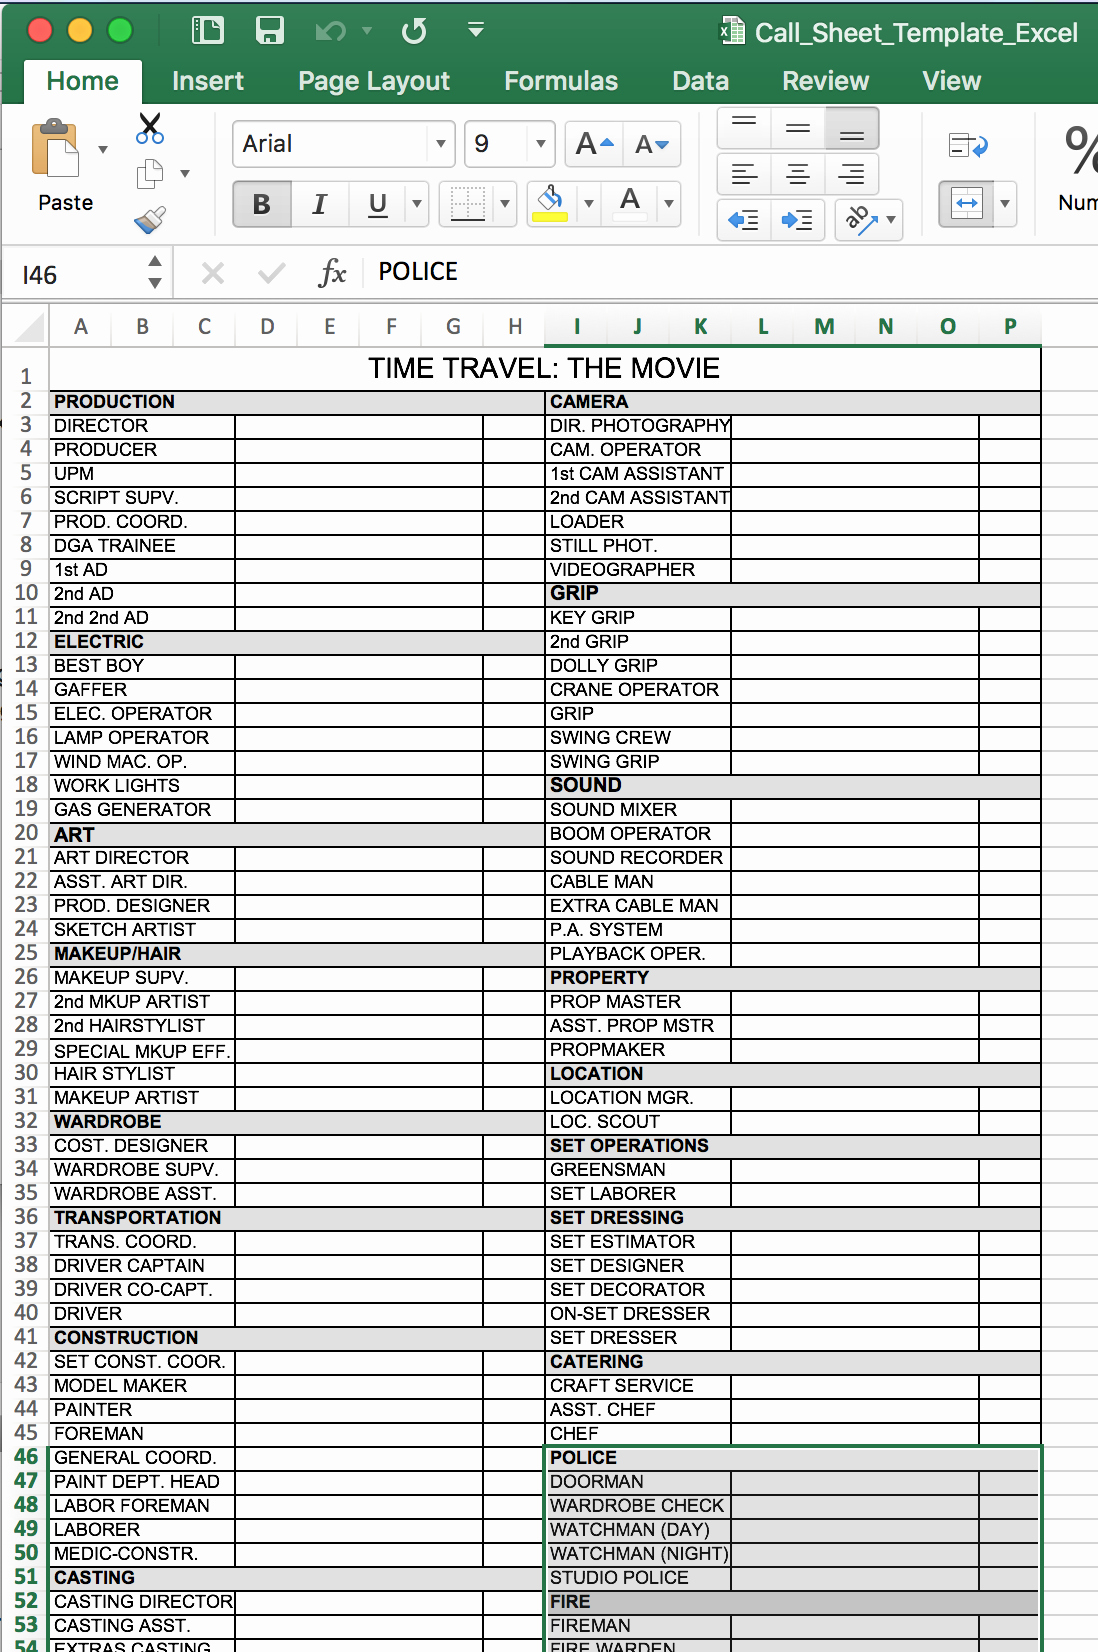 Call Sheet Template Excel New Free Call Sheet Template In Excel